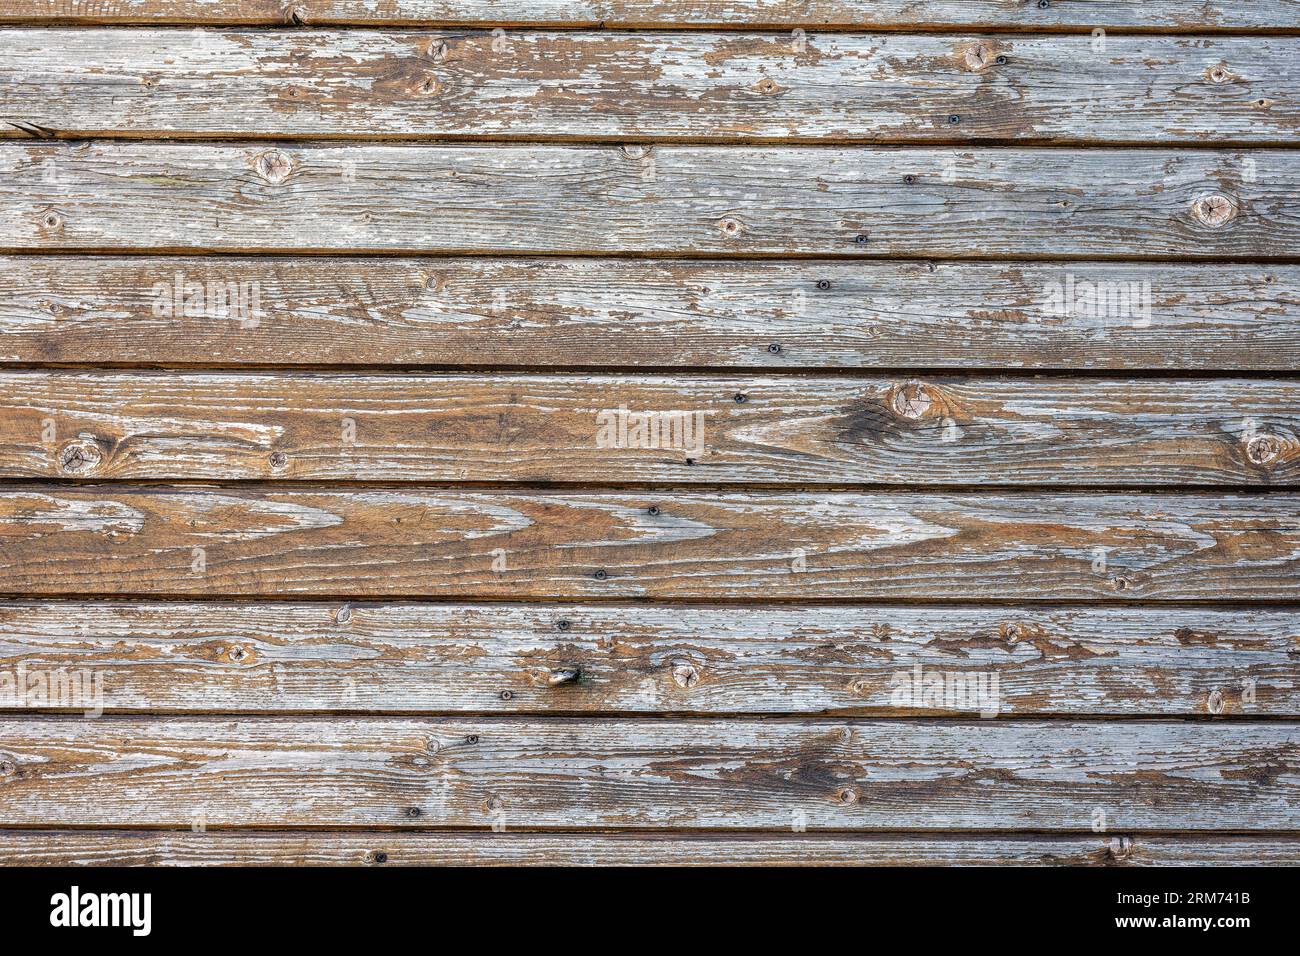 Background from a worn brown plank wall with flaking paint Stock Photo